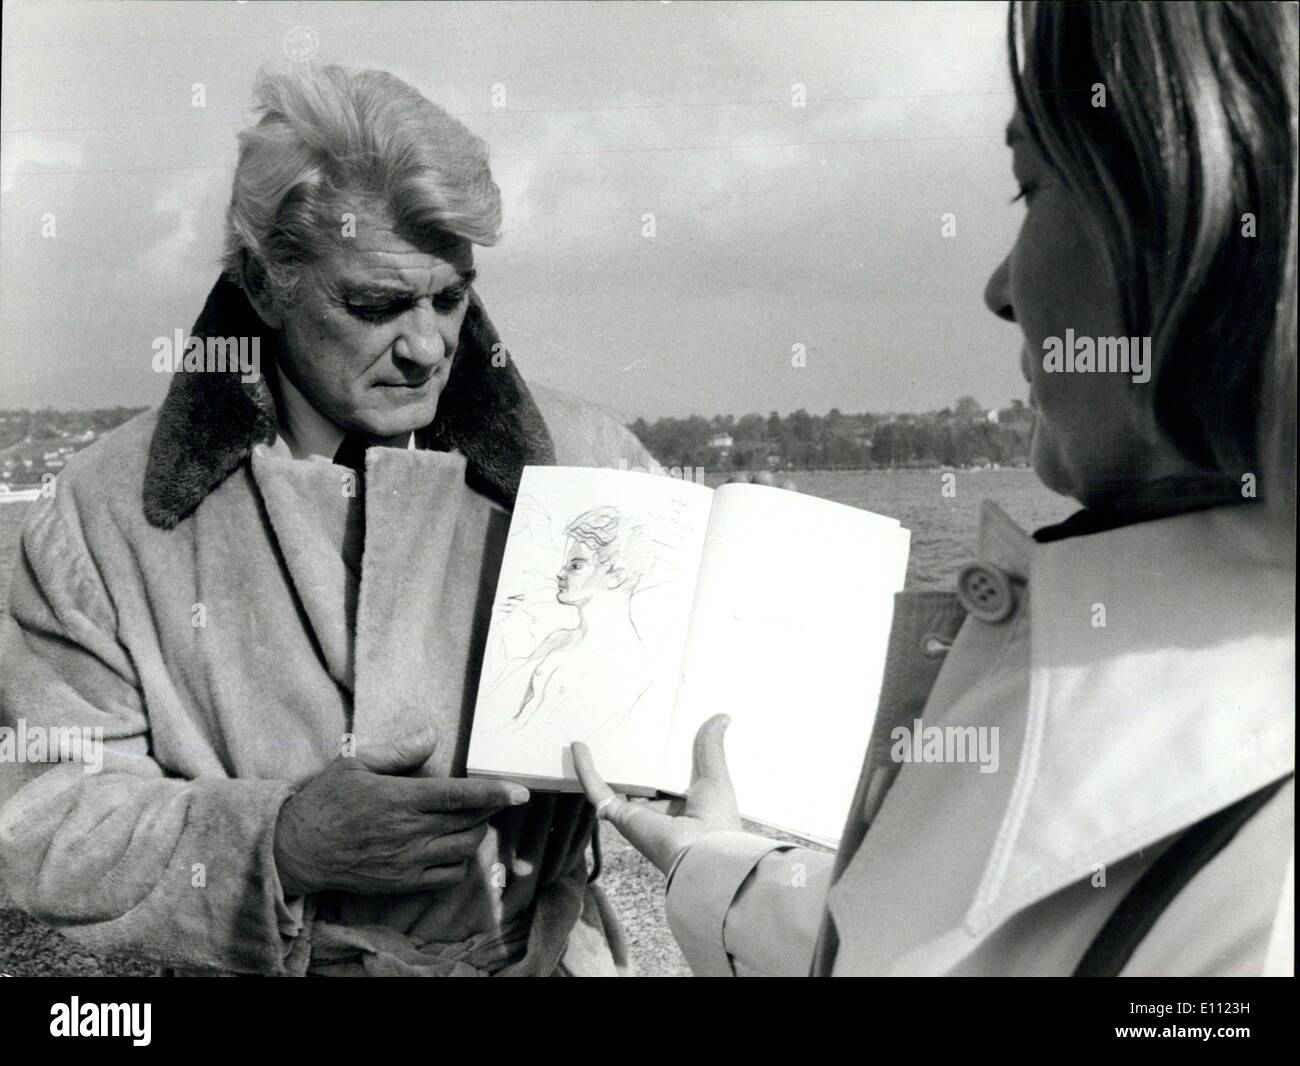 Apr. 14, 1975 - Jean Marais Biography Presented in Geneva. Famous french film and scene actor Jean Marais presented in Geneva his autobiography ''Histoires de ma vie'' containing unedited letters, drawings and poems of Jean Marais. Ops: In this book a portrait of Jean Marais by the author's greatest friend, the late poet Jean Cocteau. Stock Photo